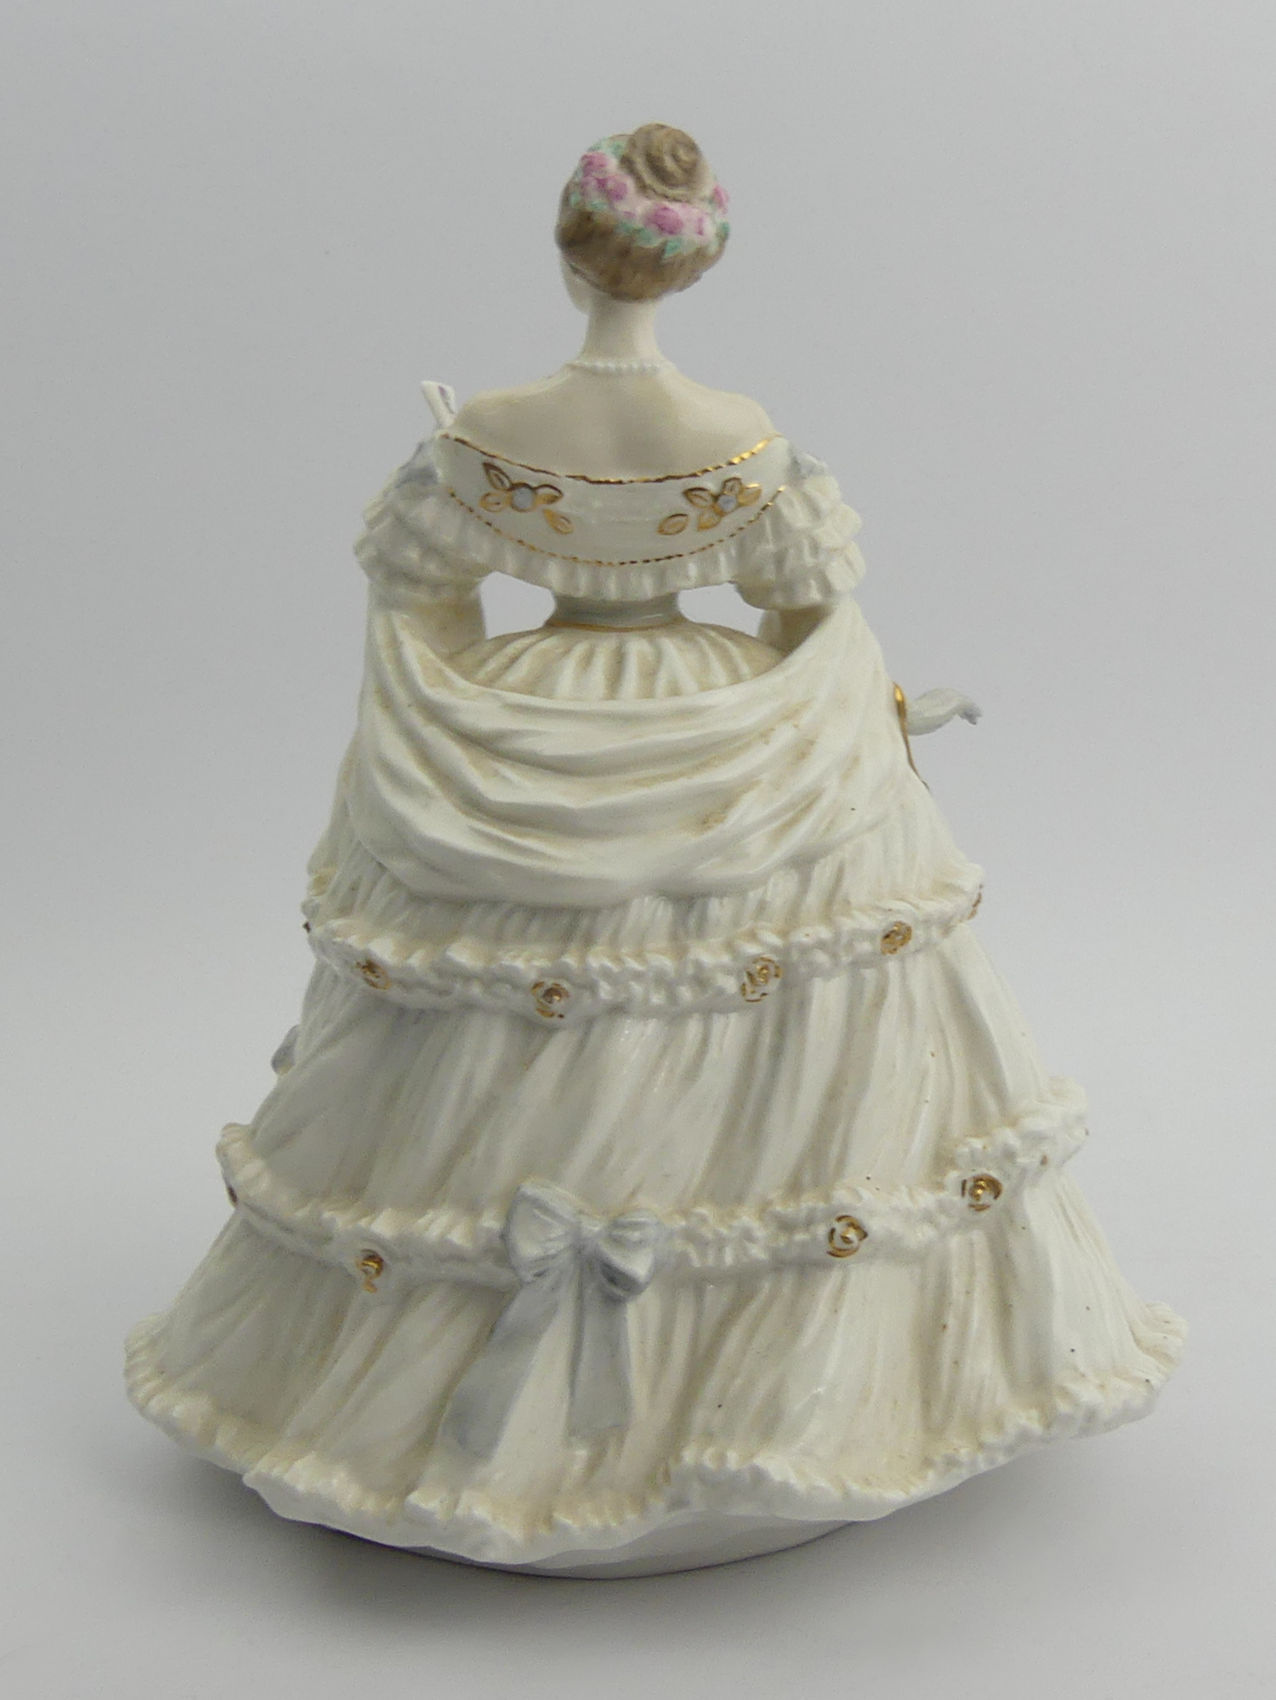 Royal Doulton Shall I Compare Thee Hn3999 limited edition china figurine. 23 cm. UK Postage £14. - Image 2 of 3